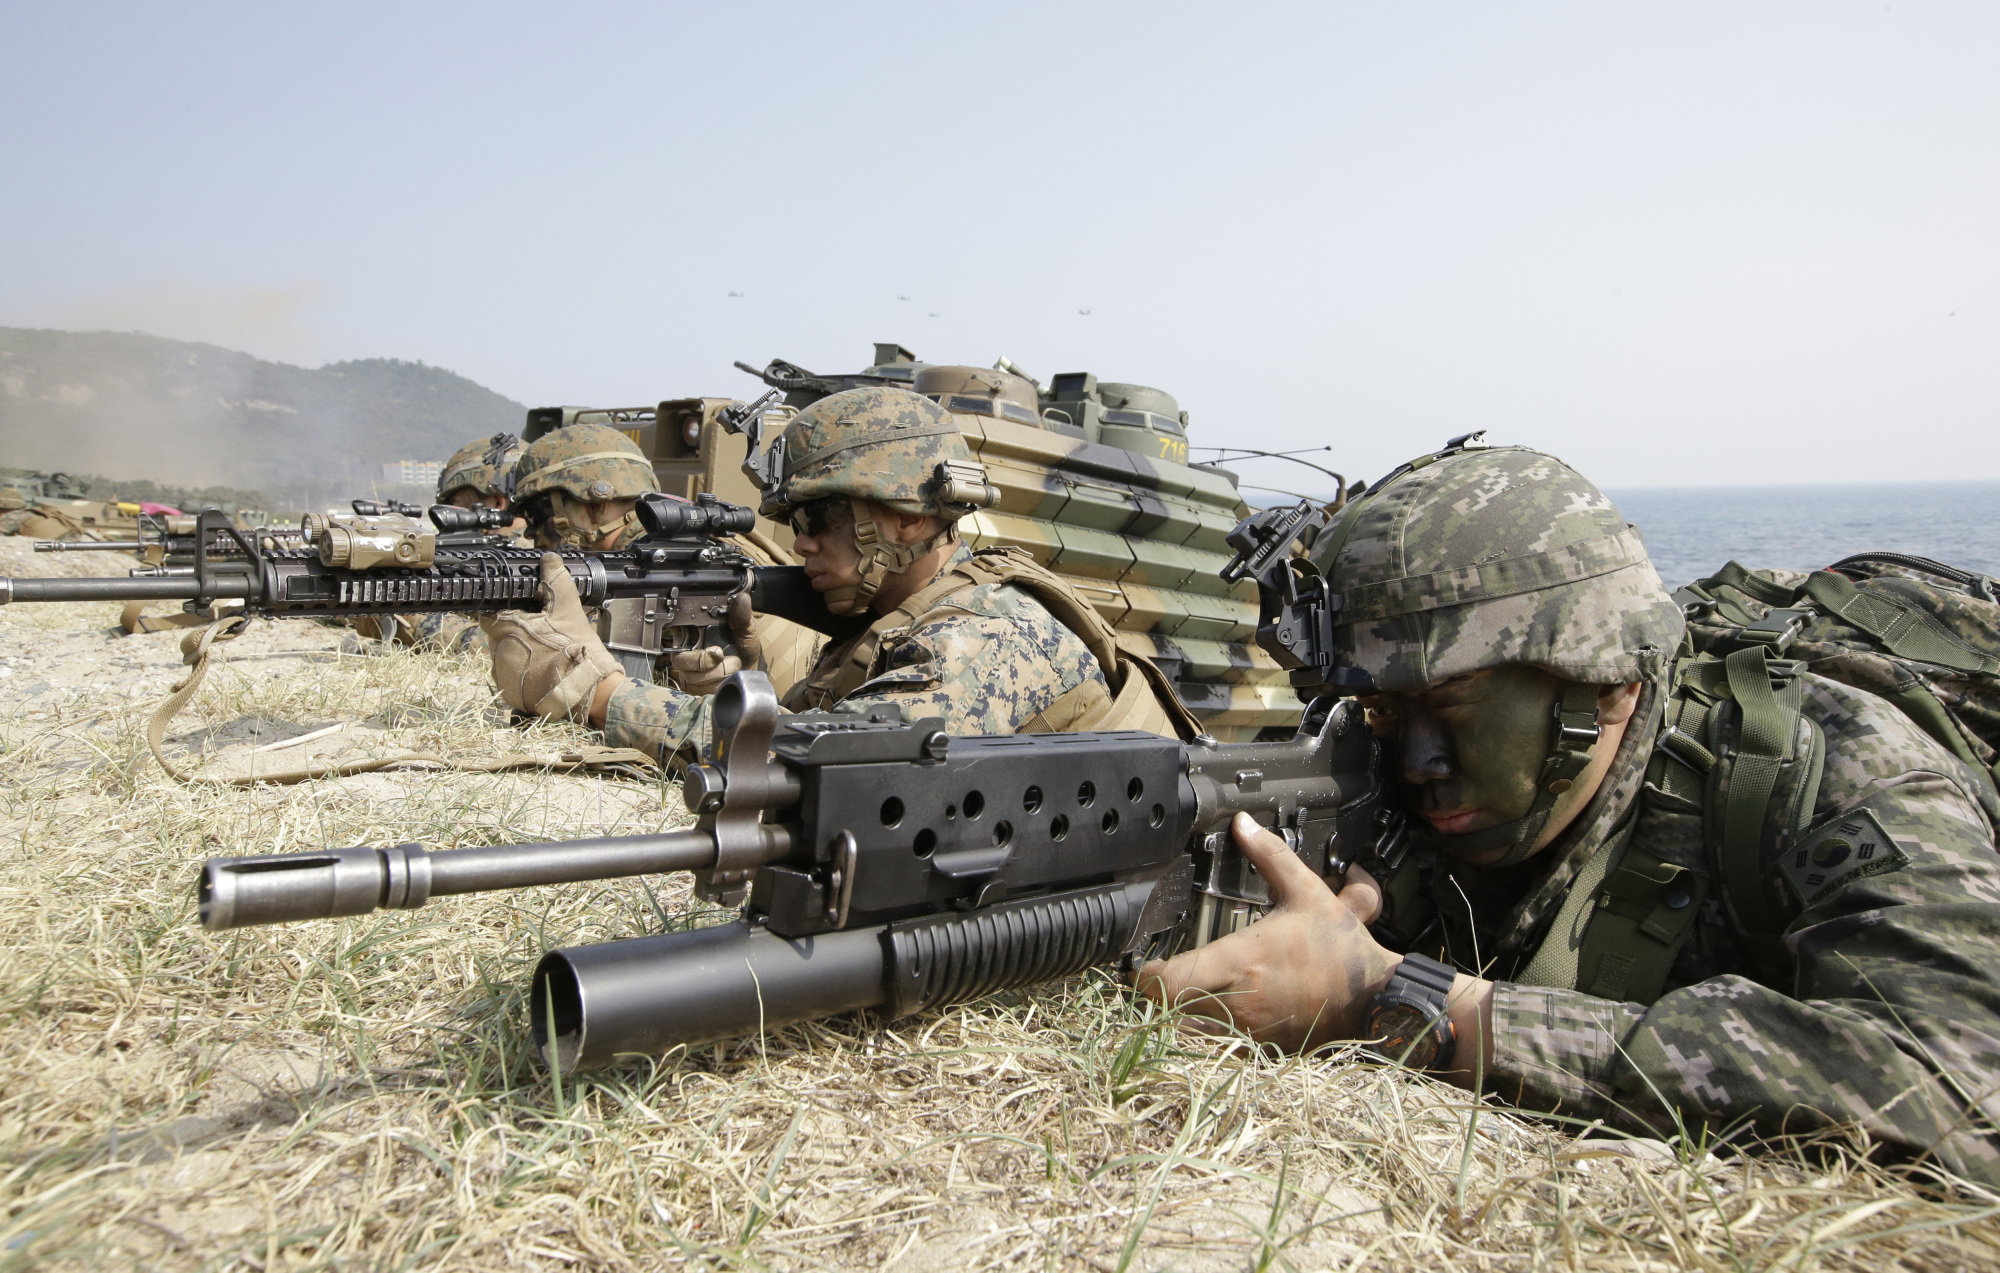 South Korean and U.S. Marines aim their weapons near amphibious assault vehicles during joint U.S.-South Korea military exercises in Pohang, South Korea, in March 2015. | AP